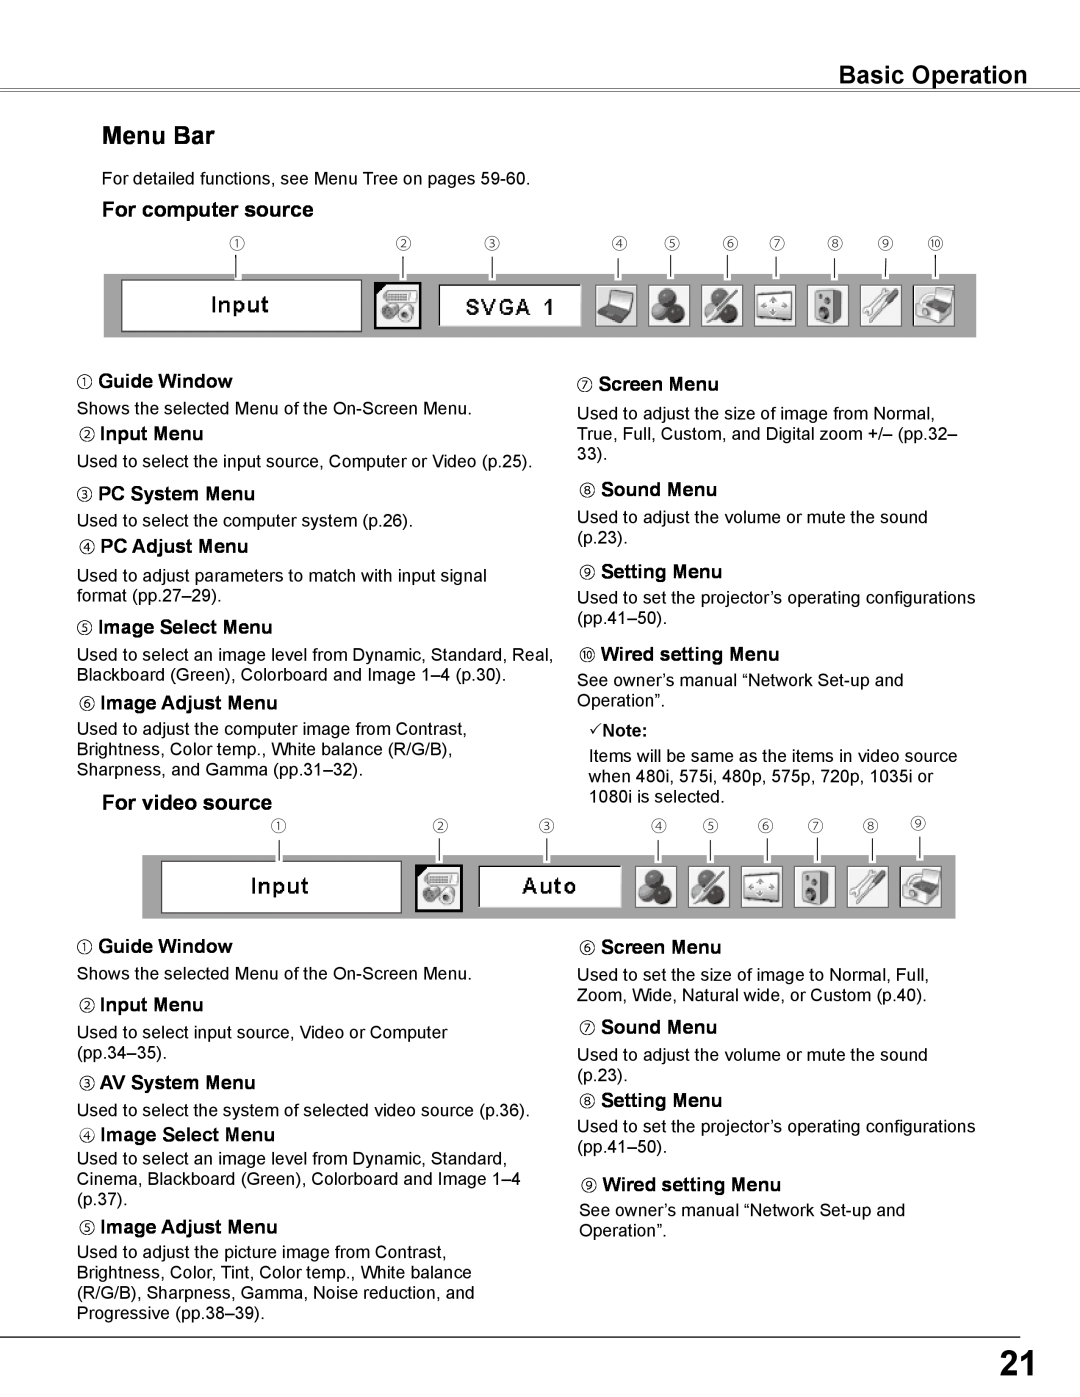 Sanyo PLC-WXL46 owner manual Menu Bar, For computer source, For video source, Basic Operation 